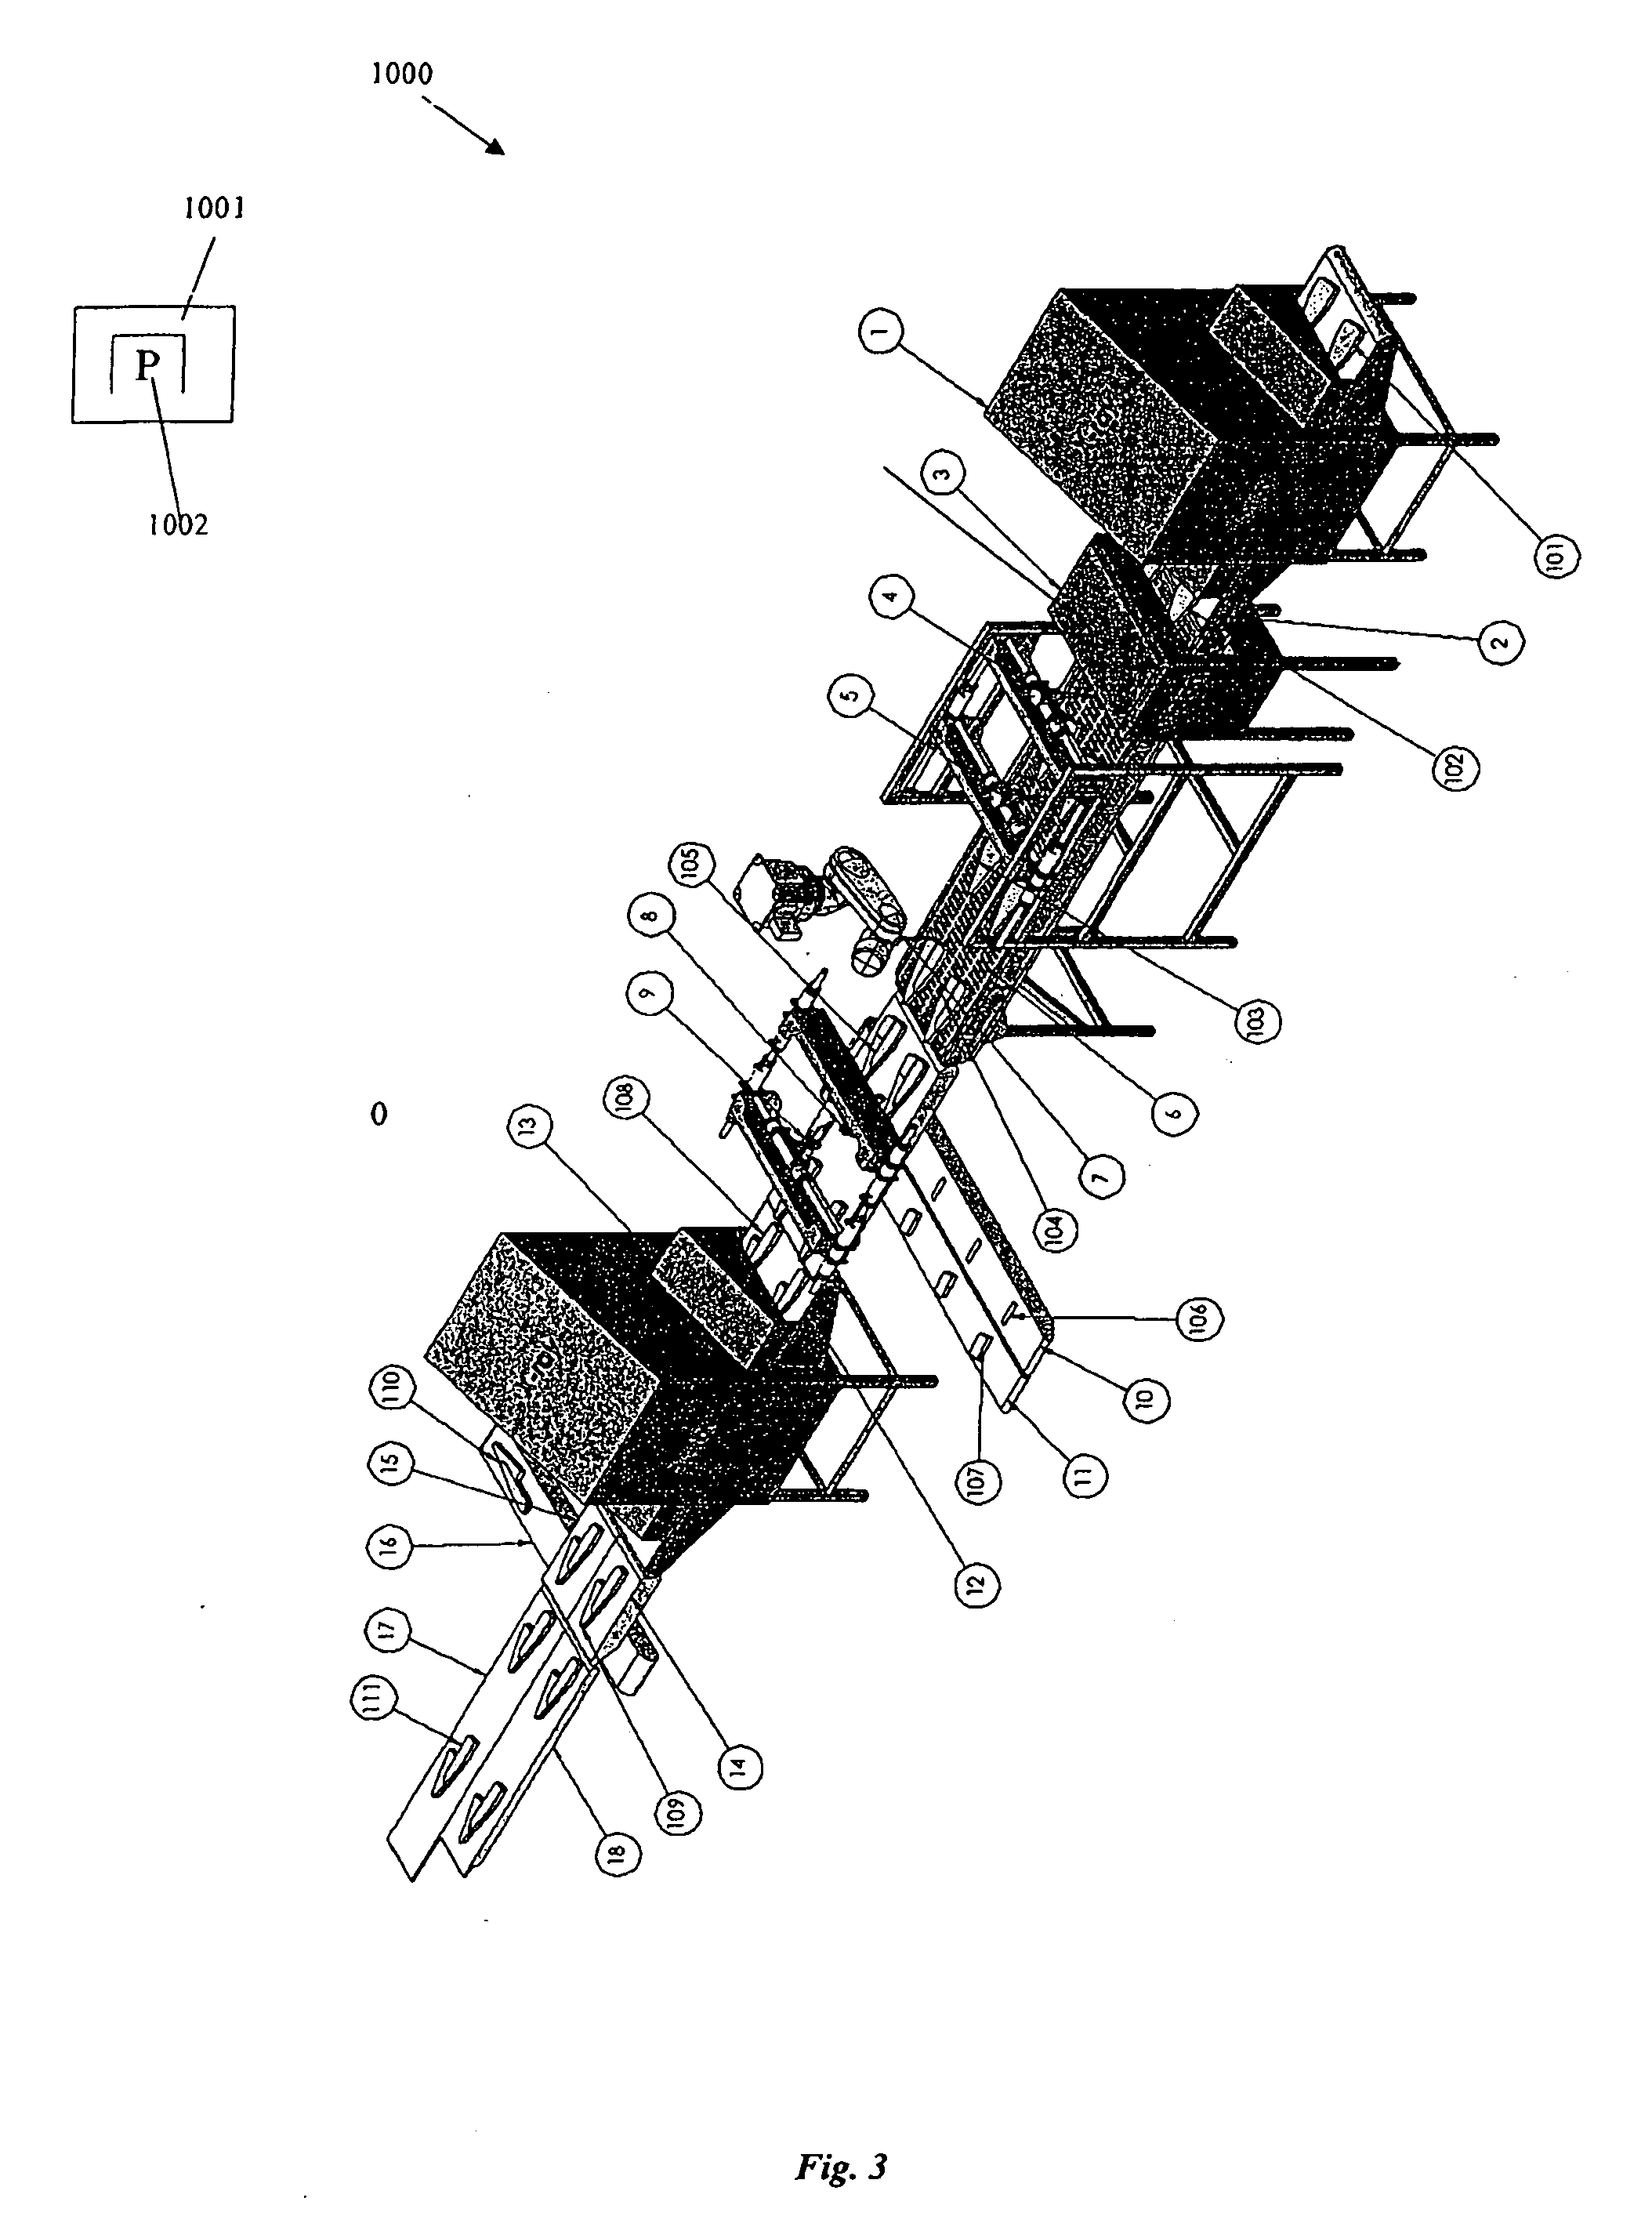 Food processing apparatus for detecting and cutting tough tissues from food items